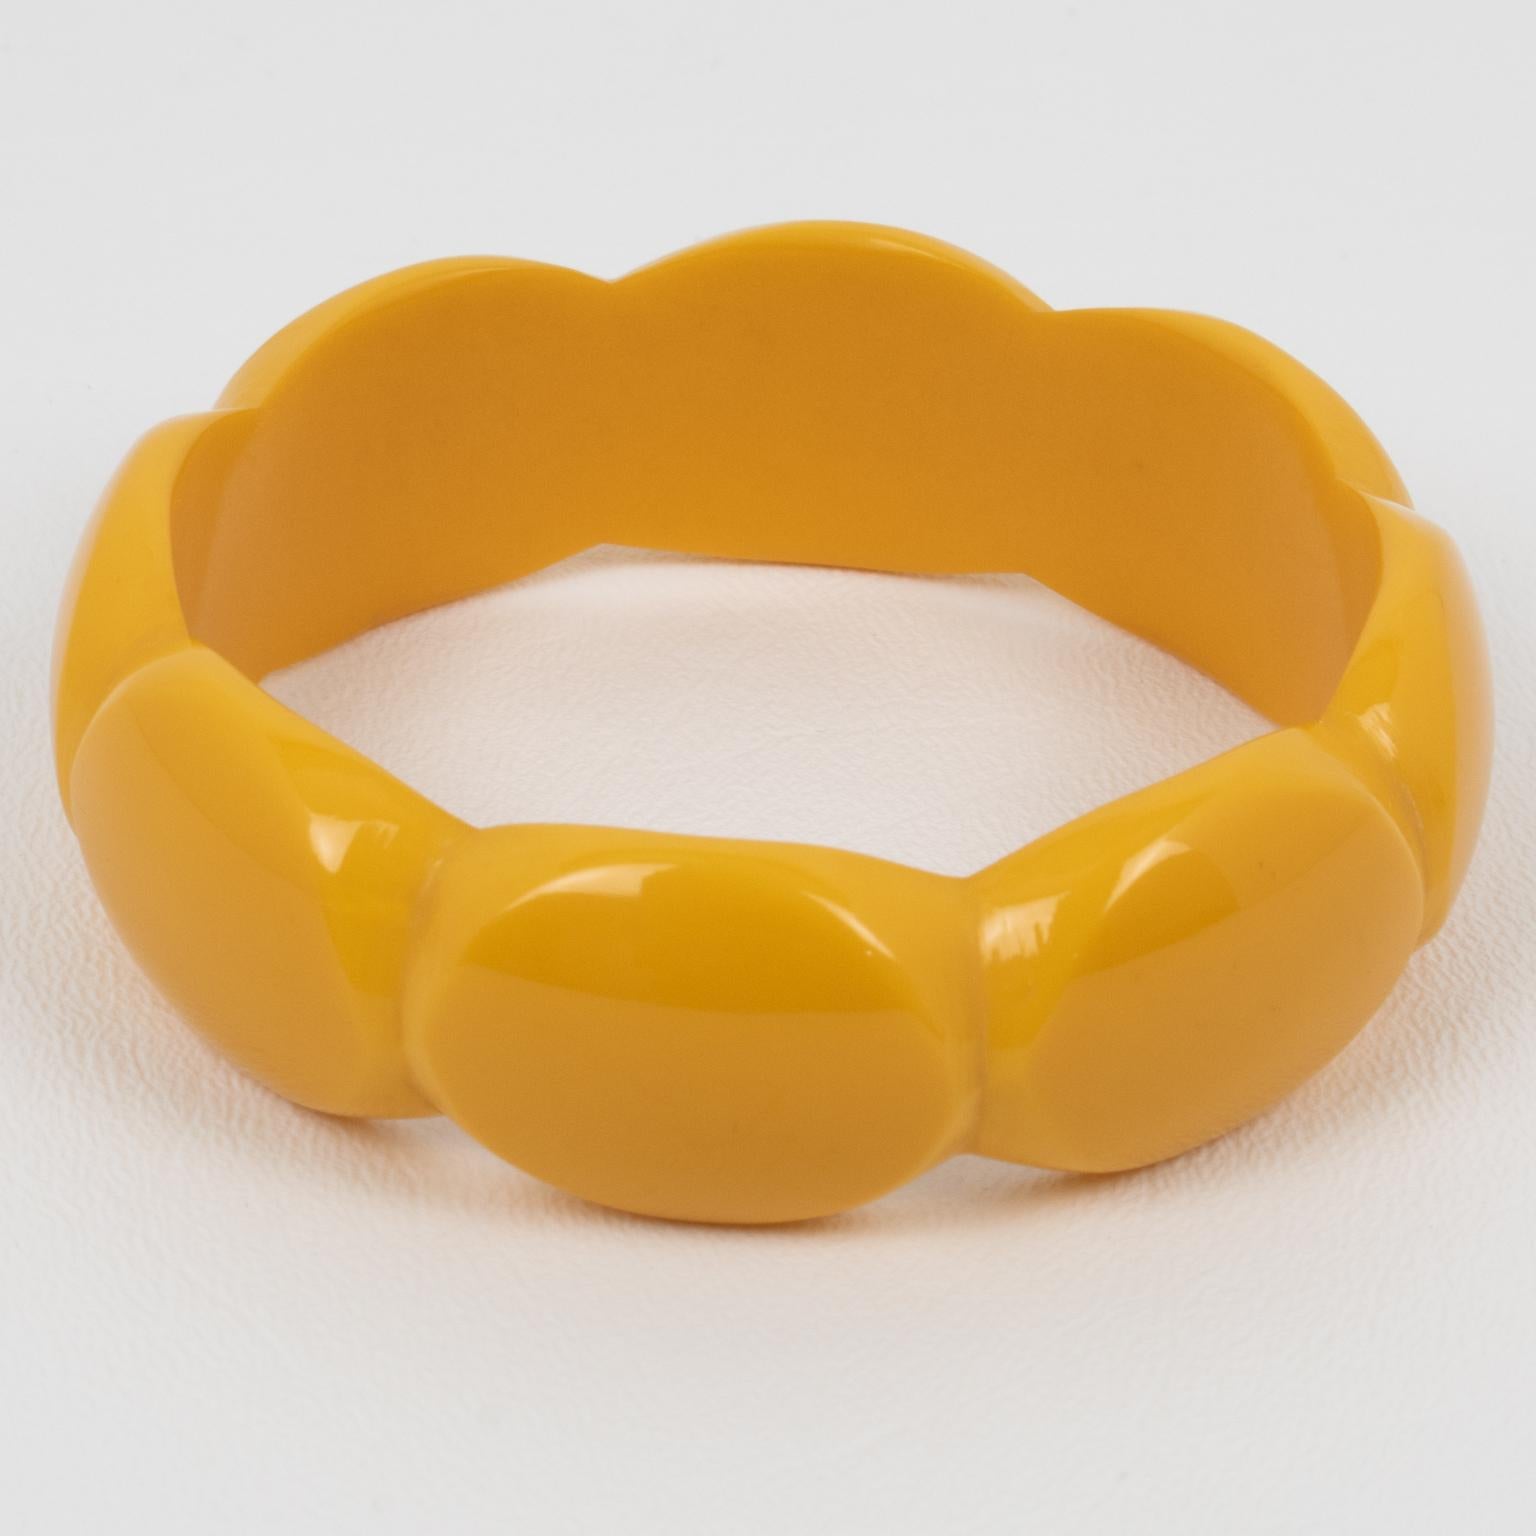 This is a superb yellow creamed corn Bakelite bracelet bangle. The piece boasts a geometric carved design with an intense, bright, and plain yellow color.
Measurements: Inside across is 2.63 in diameter (6.7 cm) - outside across is 3.19 in diameter